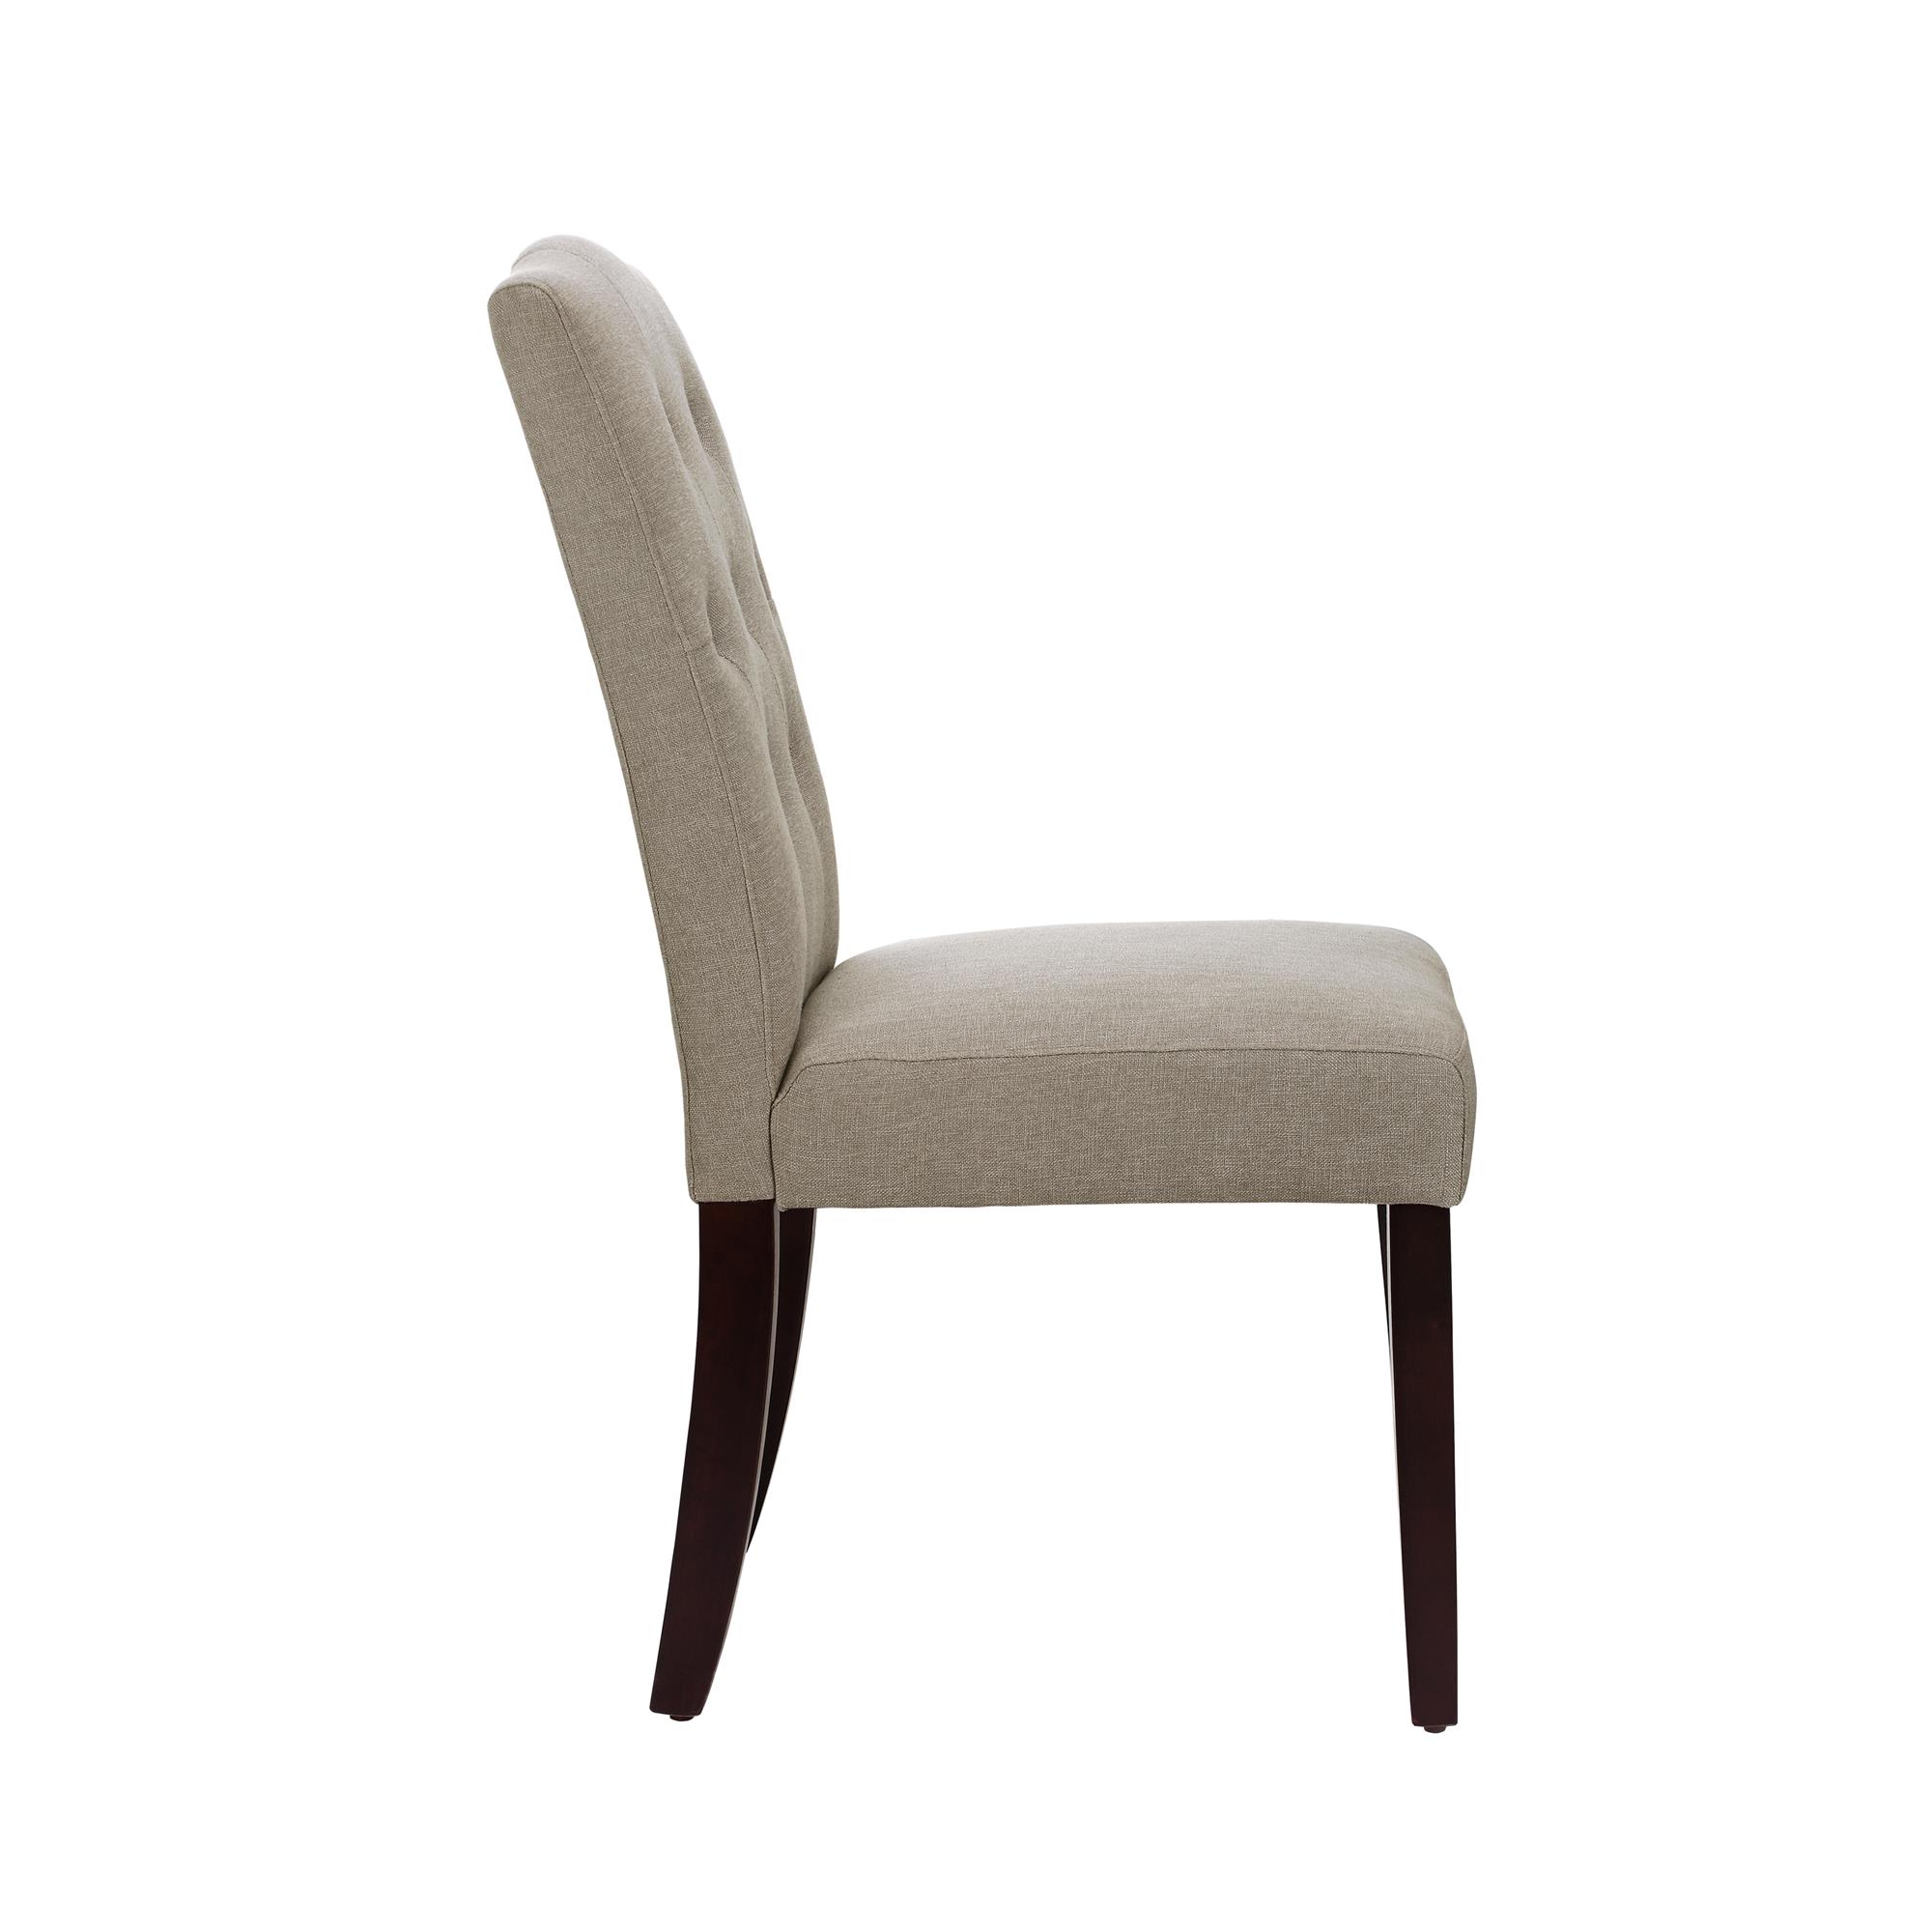 Better Homes and Gardens Parsons Upholstered Tufted Dining Chair,Taupe - image 2 of 9